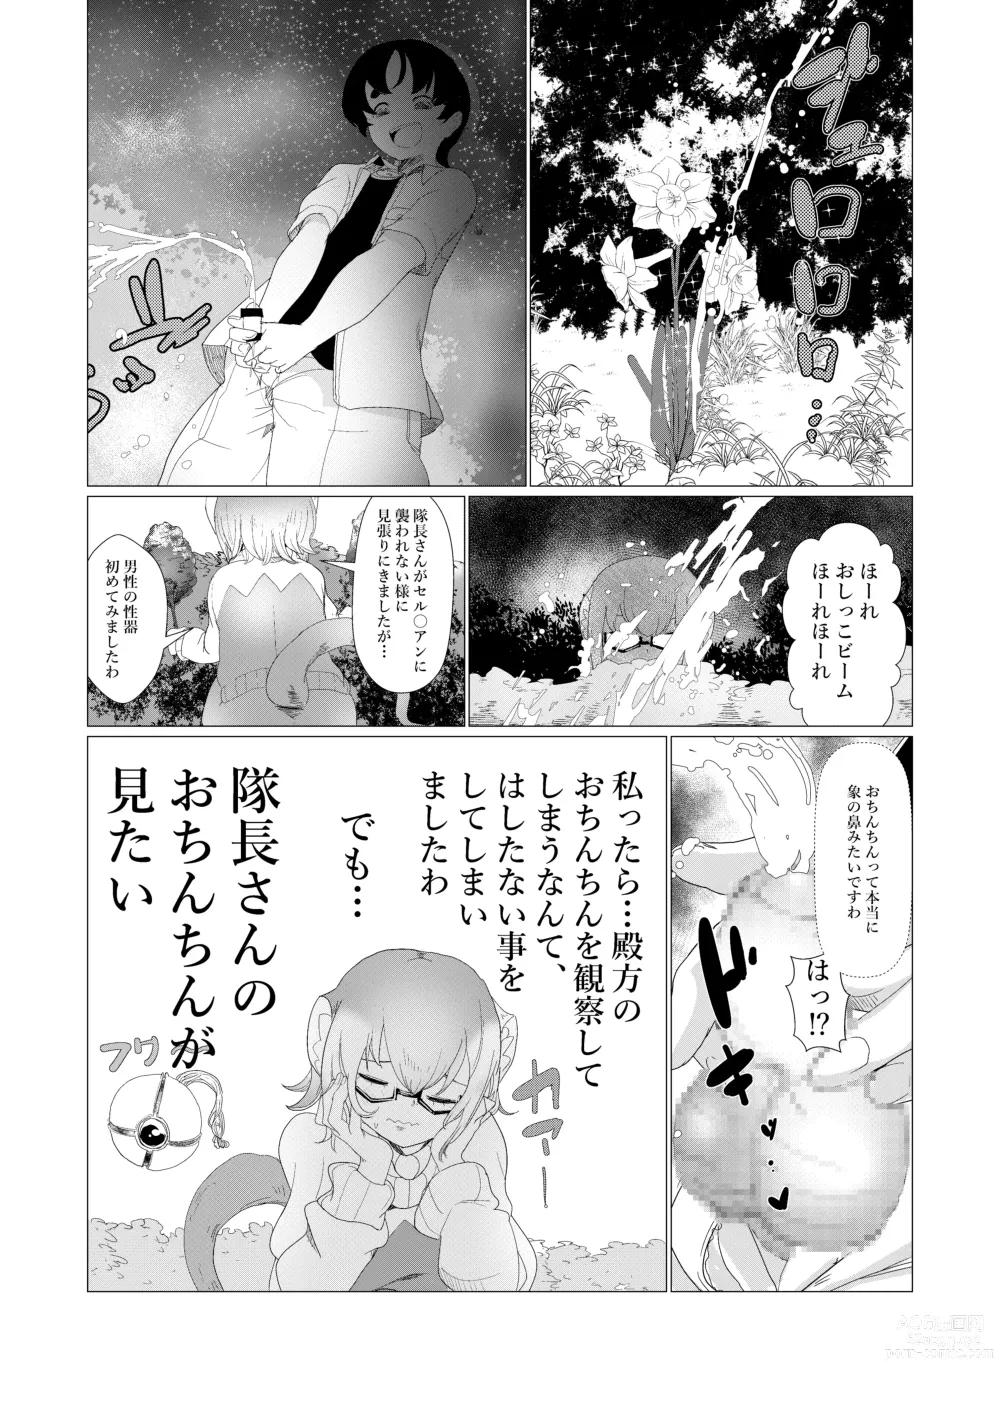 Page 4 of doujinshi Sensei... My Penis is Going Crazy